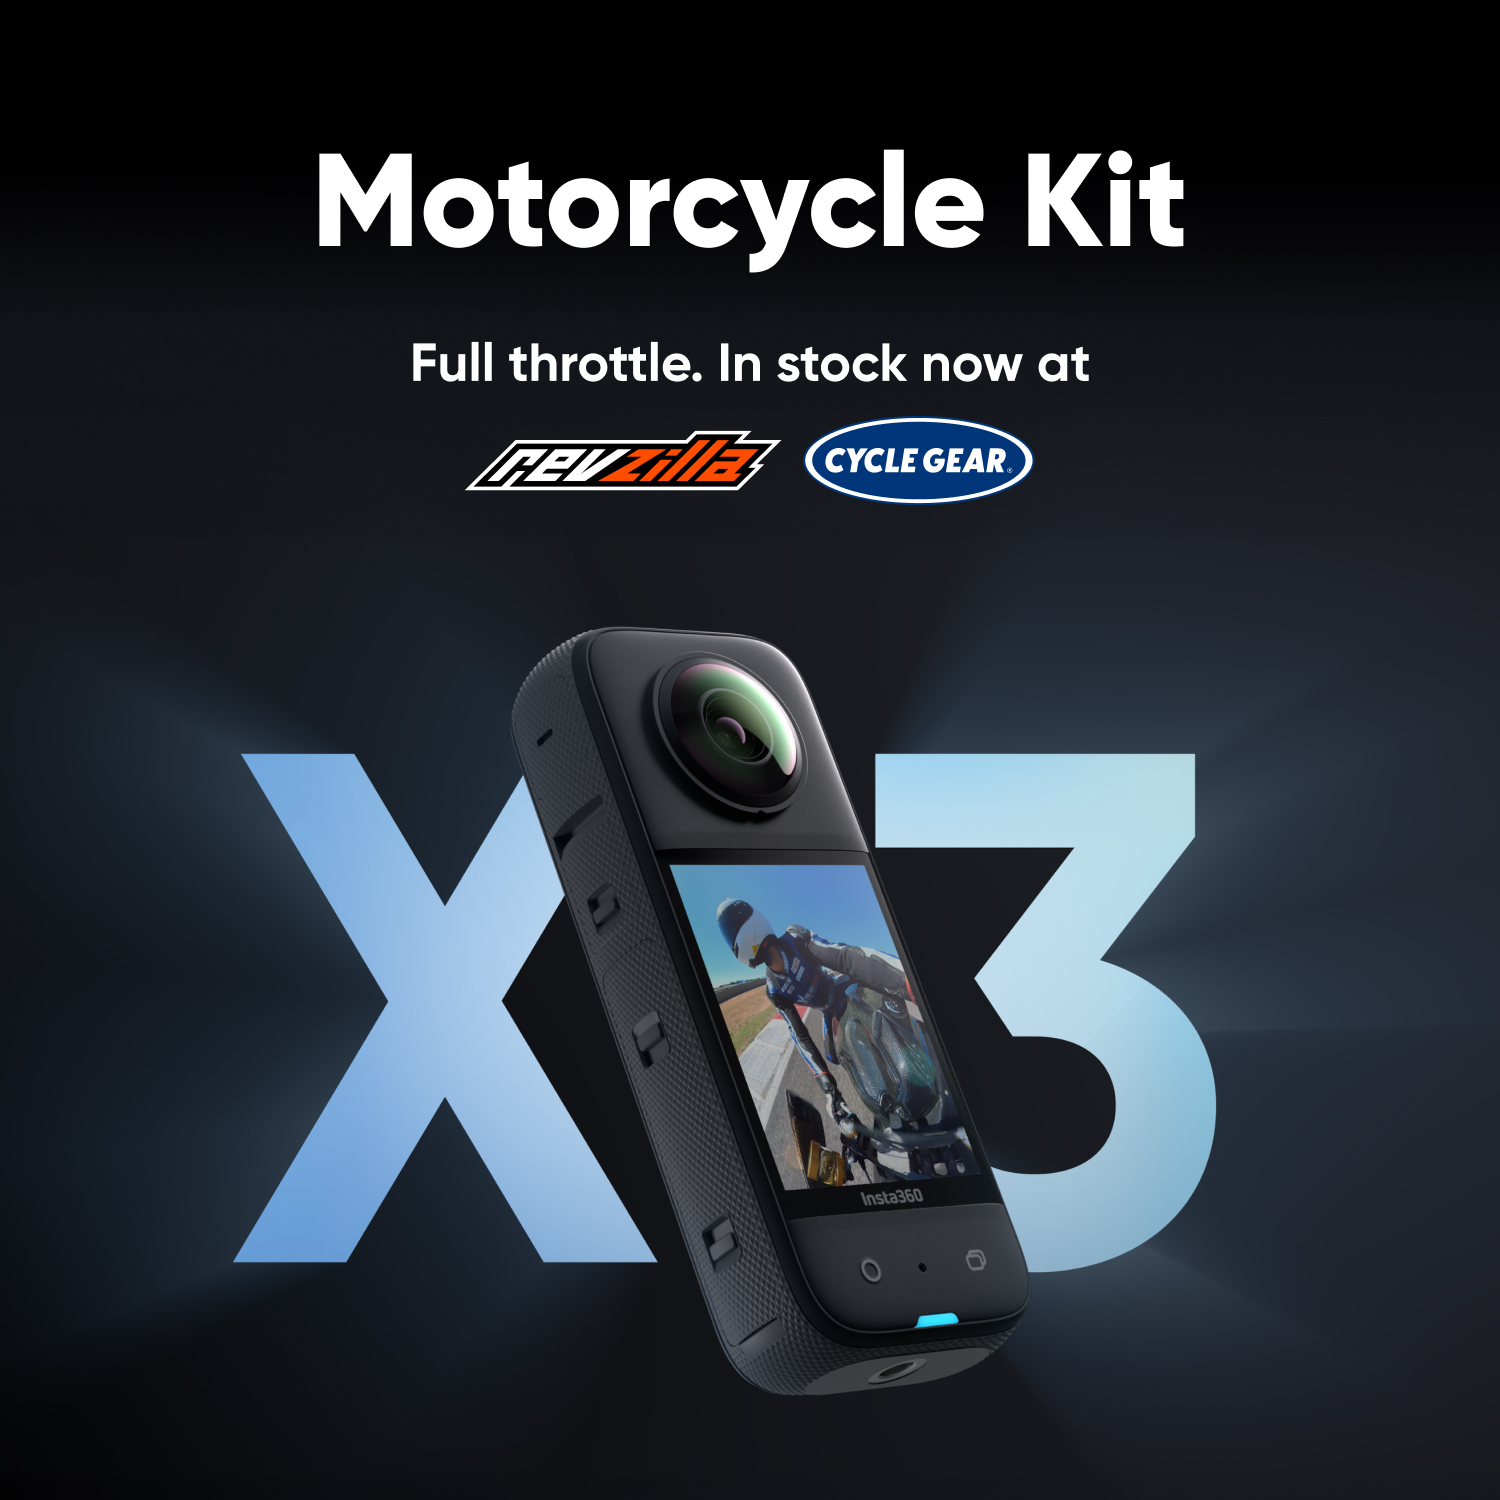 A picture of Insta360's X3 announcing a partnership with Comoto and Revzilla, Cycle Gear.